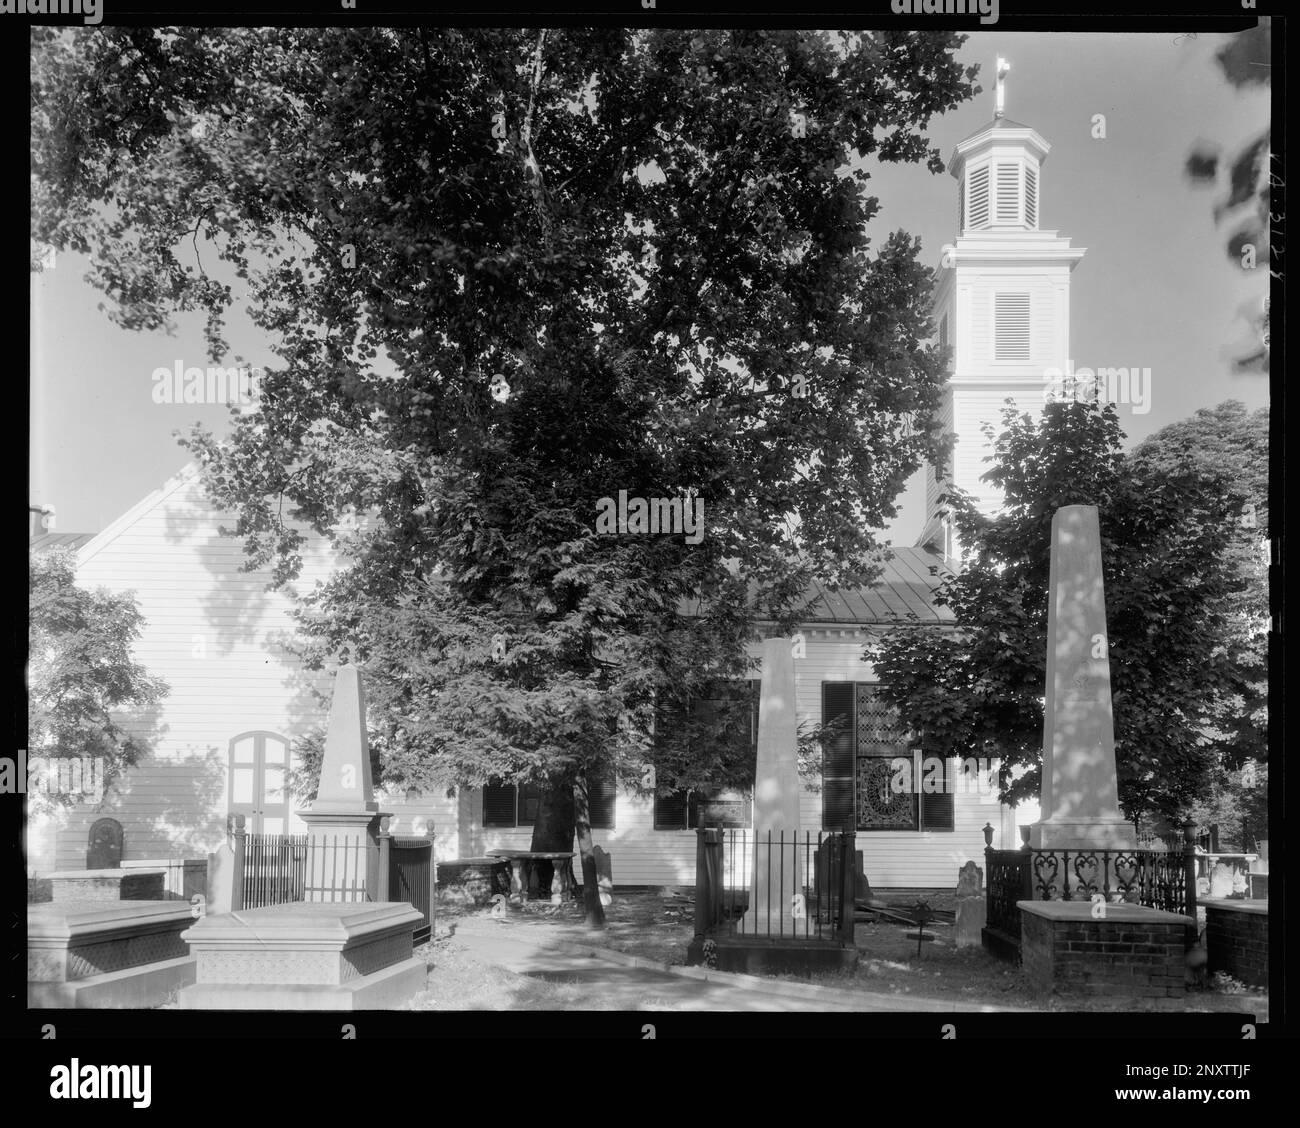 St. John's Church, Richmond, Henrico County, Virginia. Carnegie Survey of the Architecture of the South. United States  Virginia  Henrico County  Richmond, Cemeteries, Towers, Churches, Wooden buildings. Stock Photo